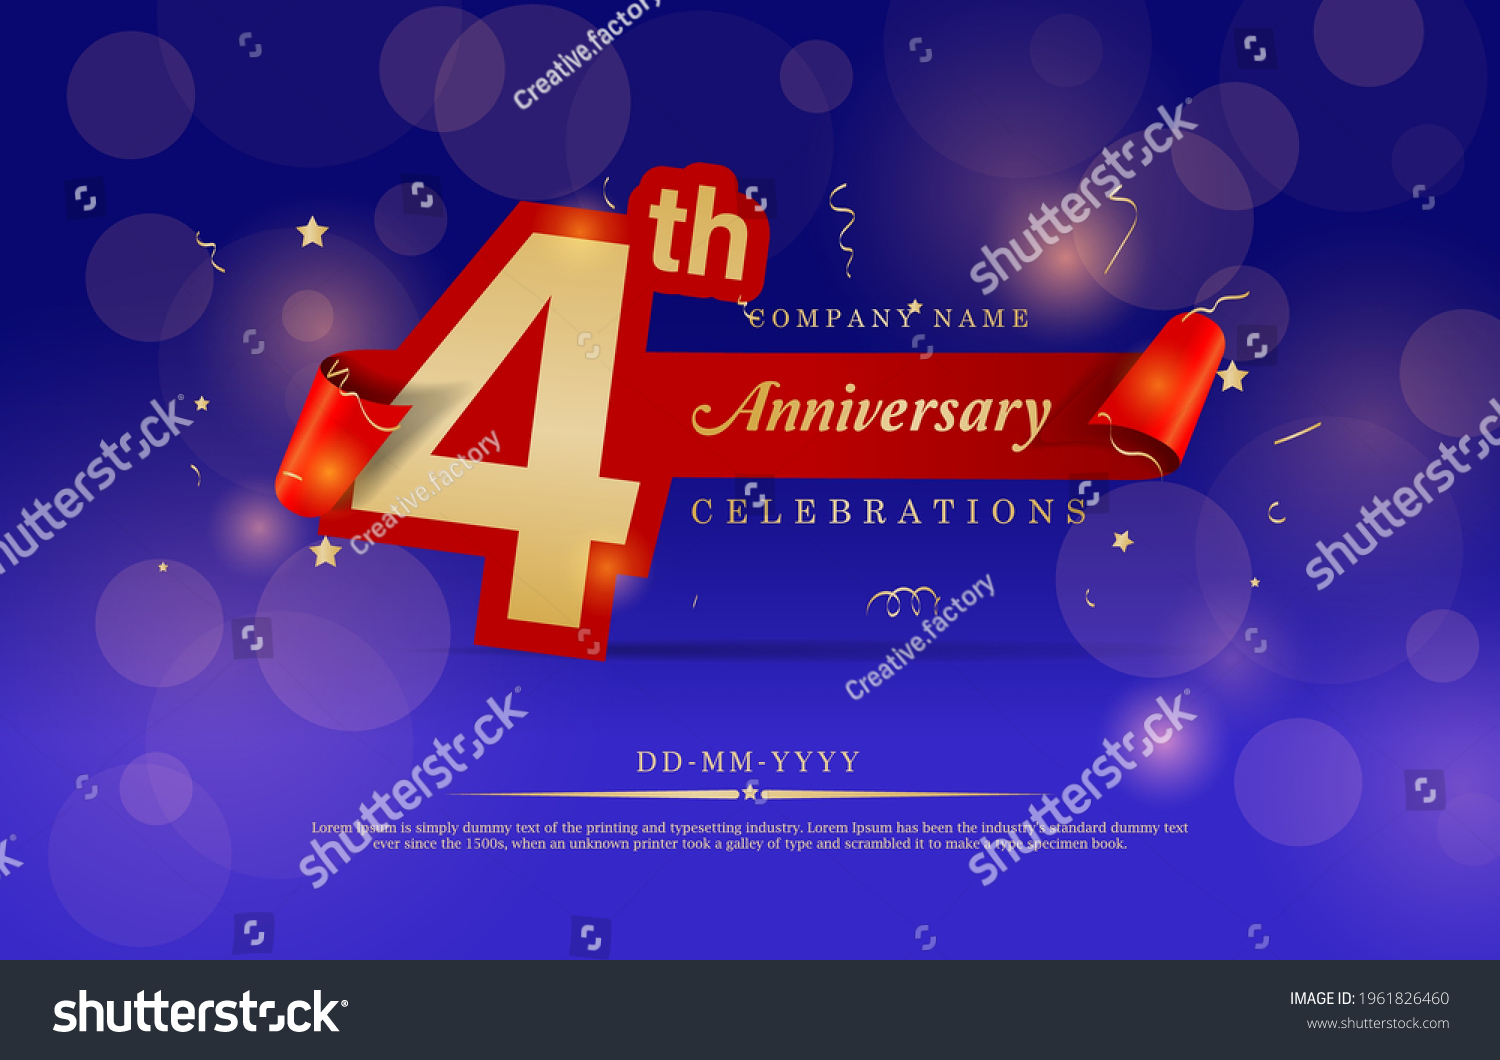 SVG of 4th Anniversary celebration. Celebrating 4 years logo with confetti in Blue Background. Golden number 4 with sparkling confetti.  svg